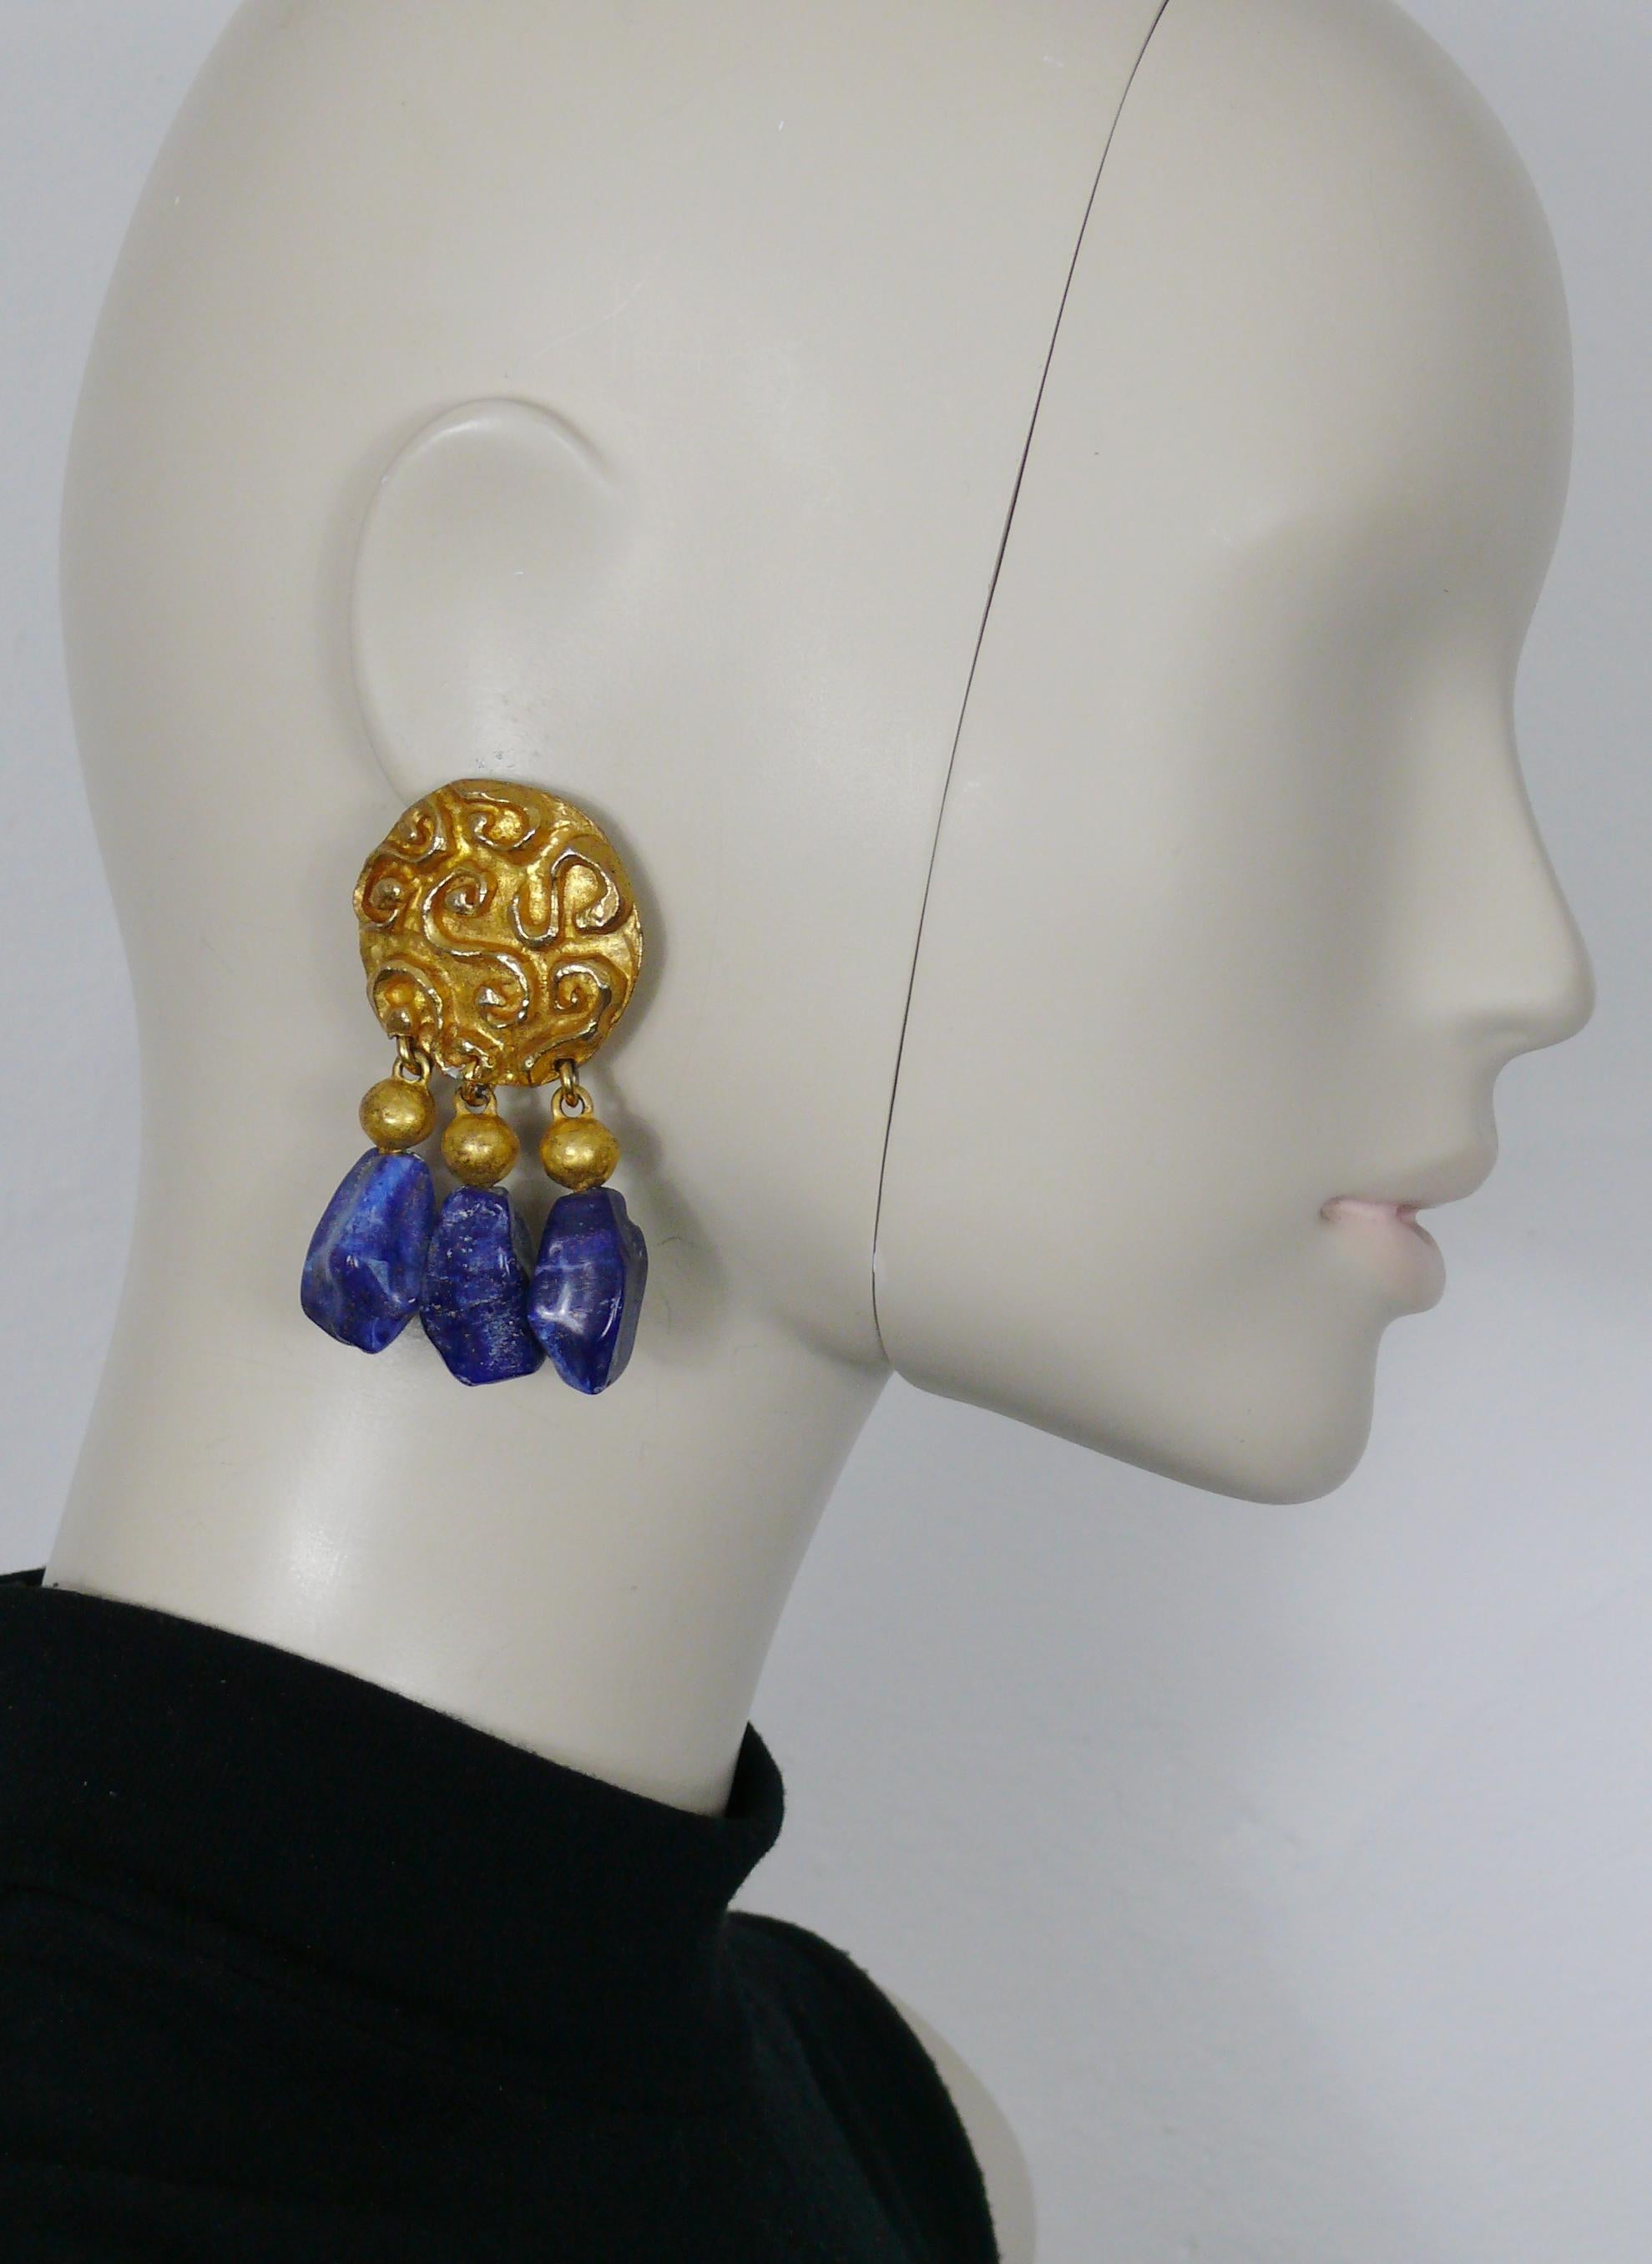 EDOUARD RAMBAUD Paris vintage dangling earrings (clip-on) featuring a textured round top with resin lapis lazuli stone charms.

Gold tone metal hardware.

Embossed EDOUARD RAMBAUD Paris.

Indicative measurements : height approx. 7 cm (2.76 inches) /